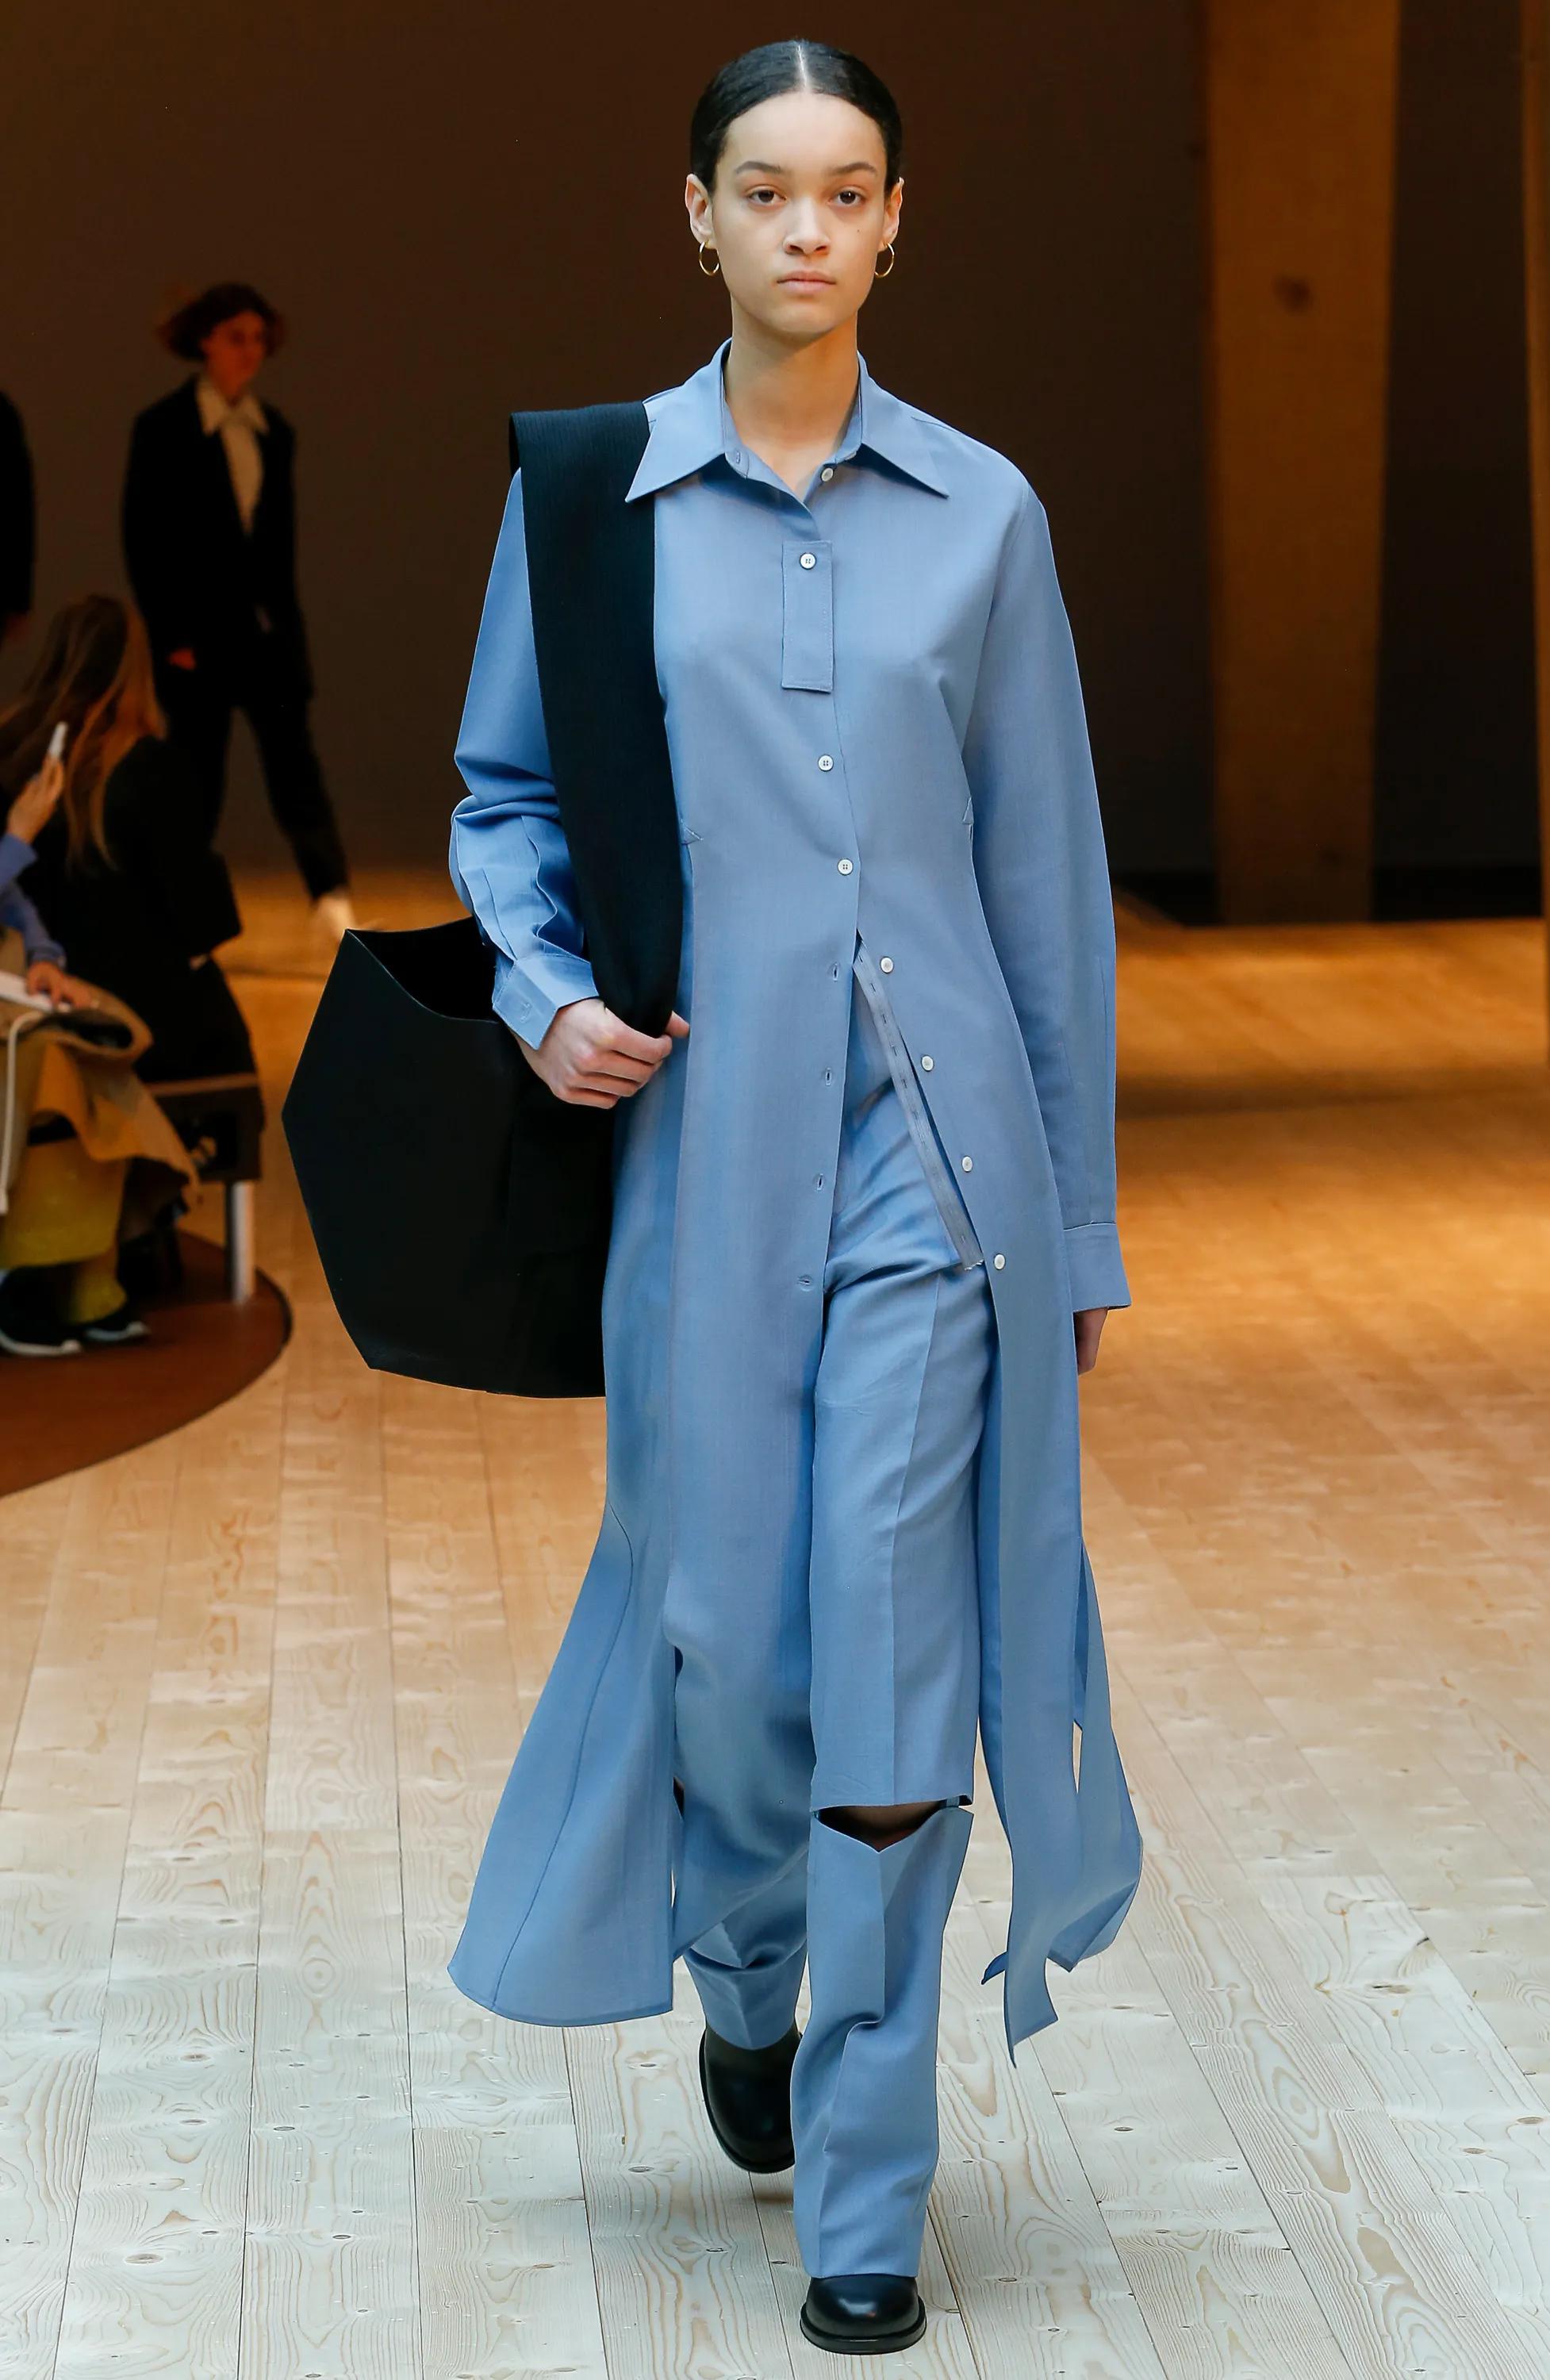 A/W 2017 Céline by Phoebe Philo button-up light blue shirt dress / top. Long sleeve dress with deconstructed hanging rectangular detail at bust. Features high open slits at sides that are reminiscent of 1960's 'carwash' fringe. Can be utilized as